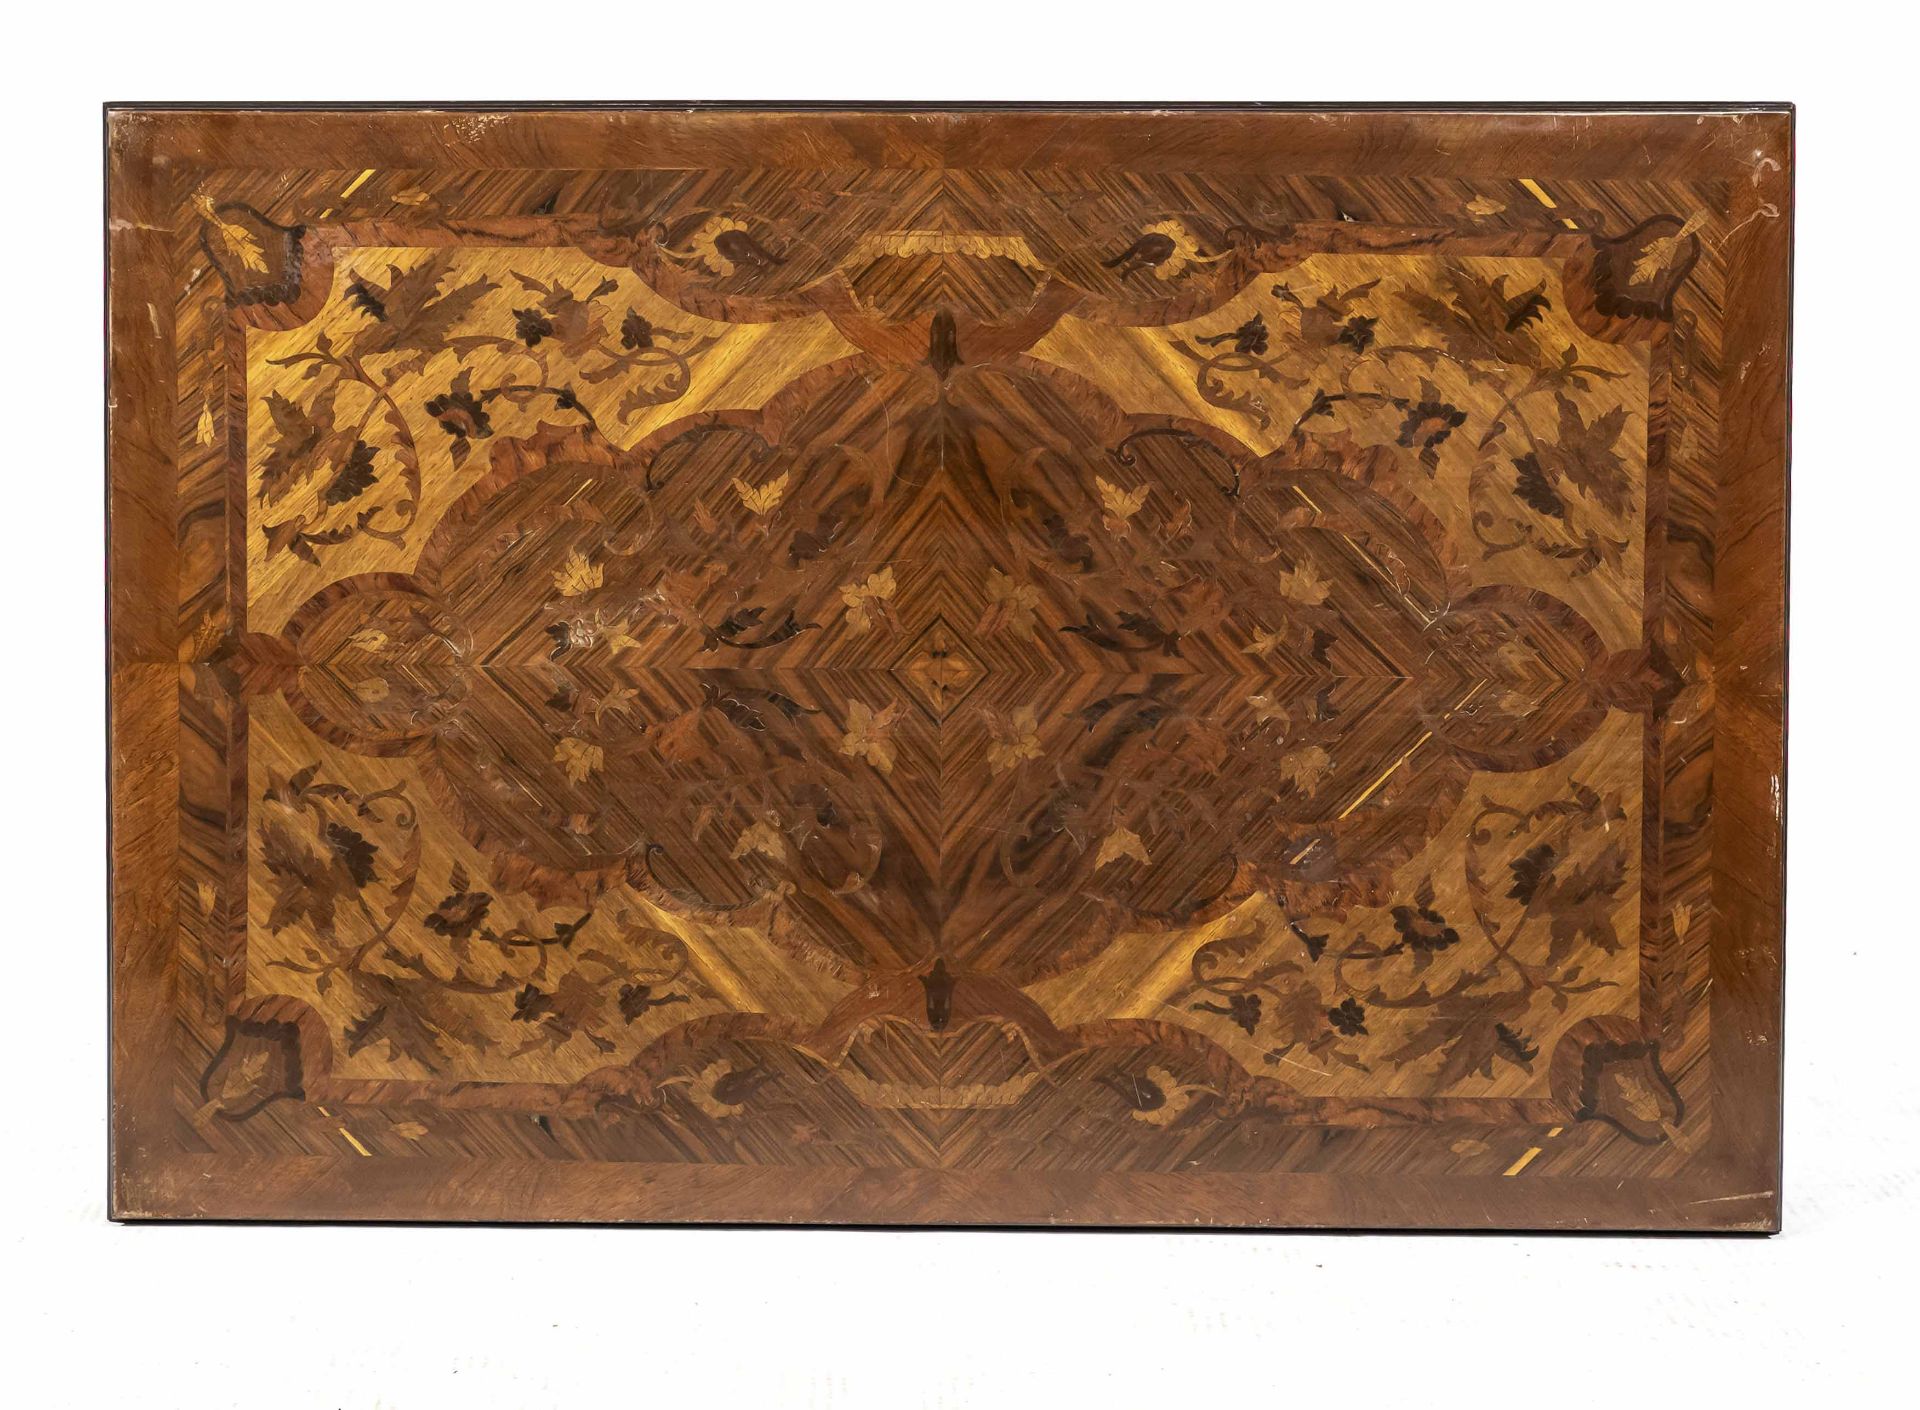 Coffee table in Louis-Seize style, late 20th century, mahogany veneered and inlaid with other - Image 3 of 3